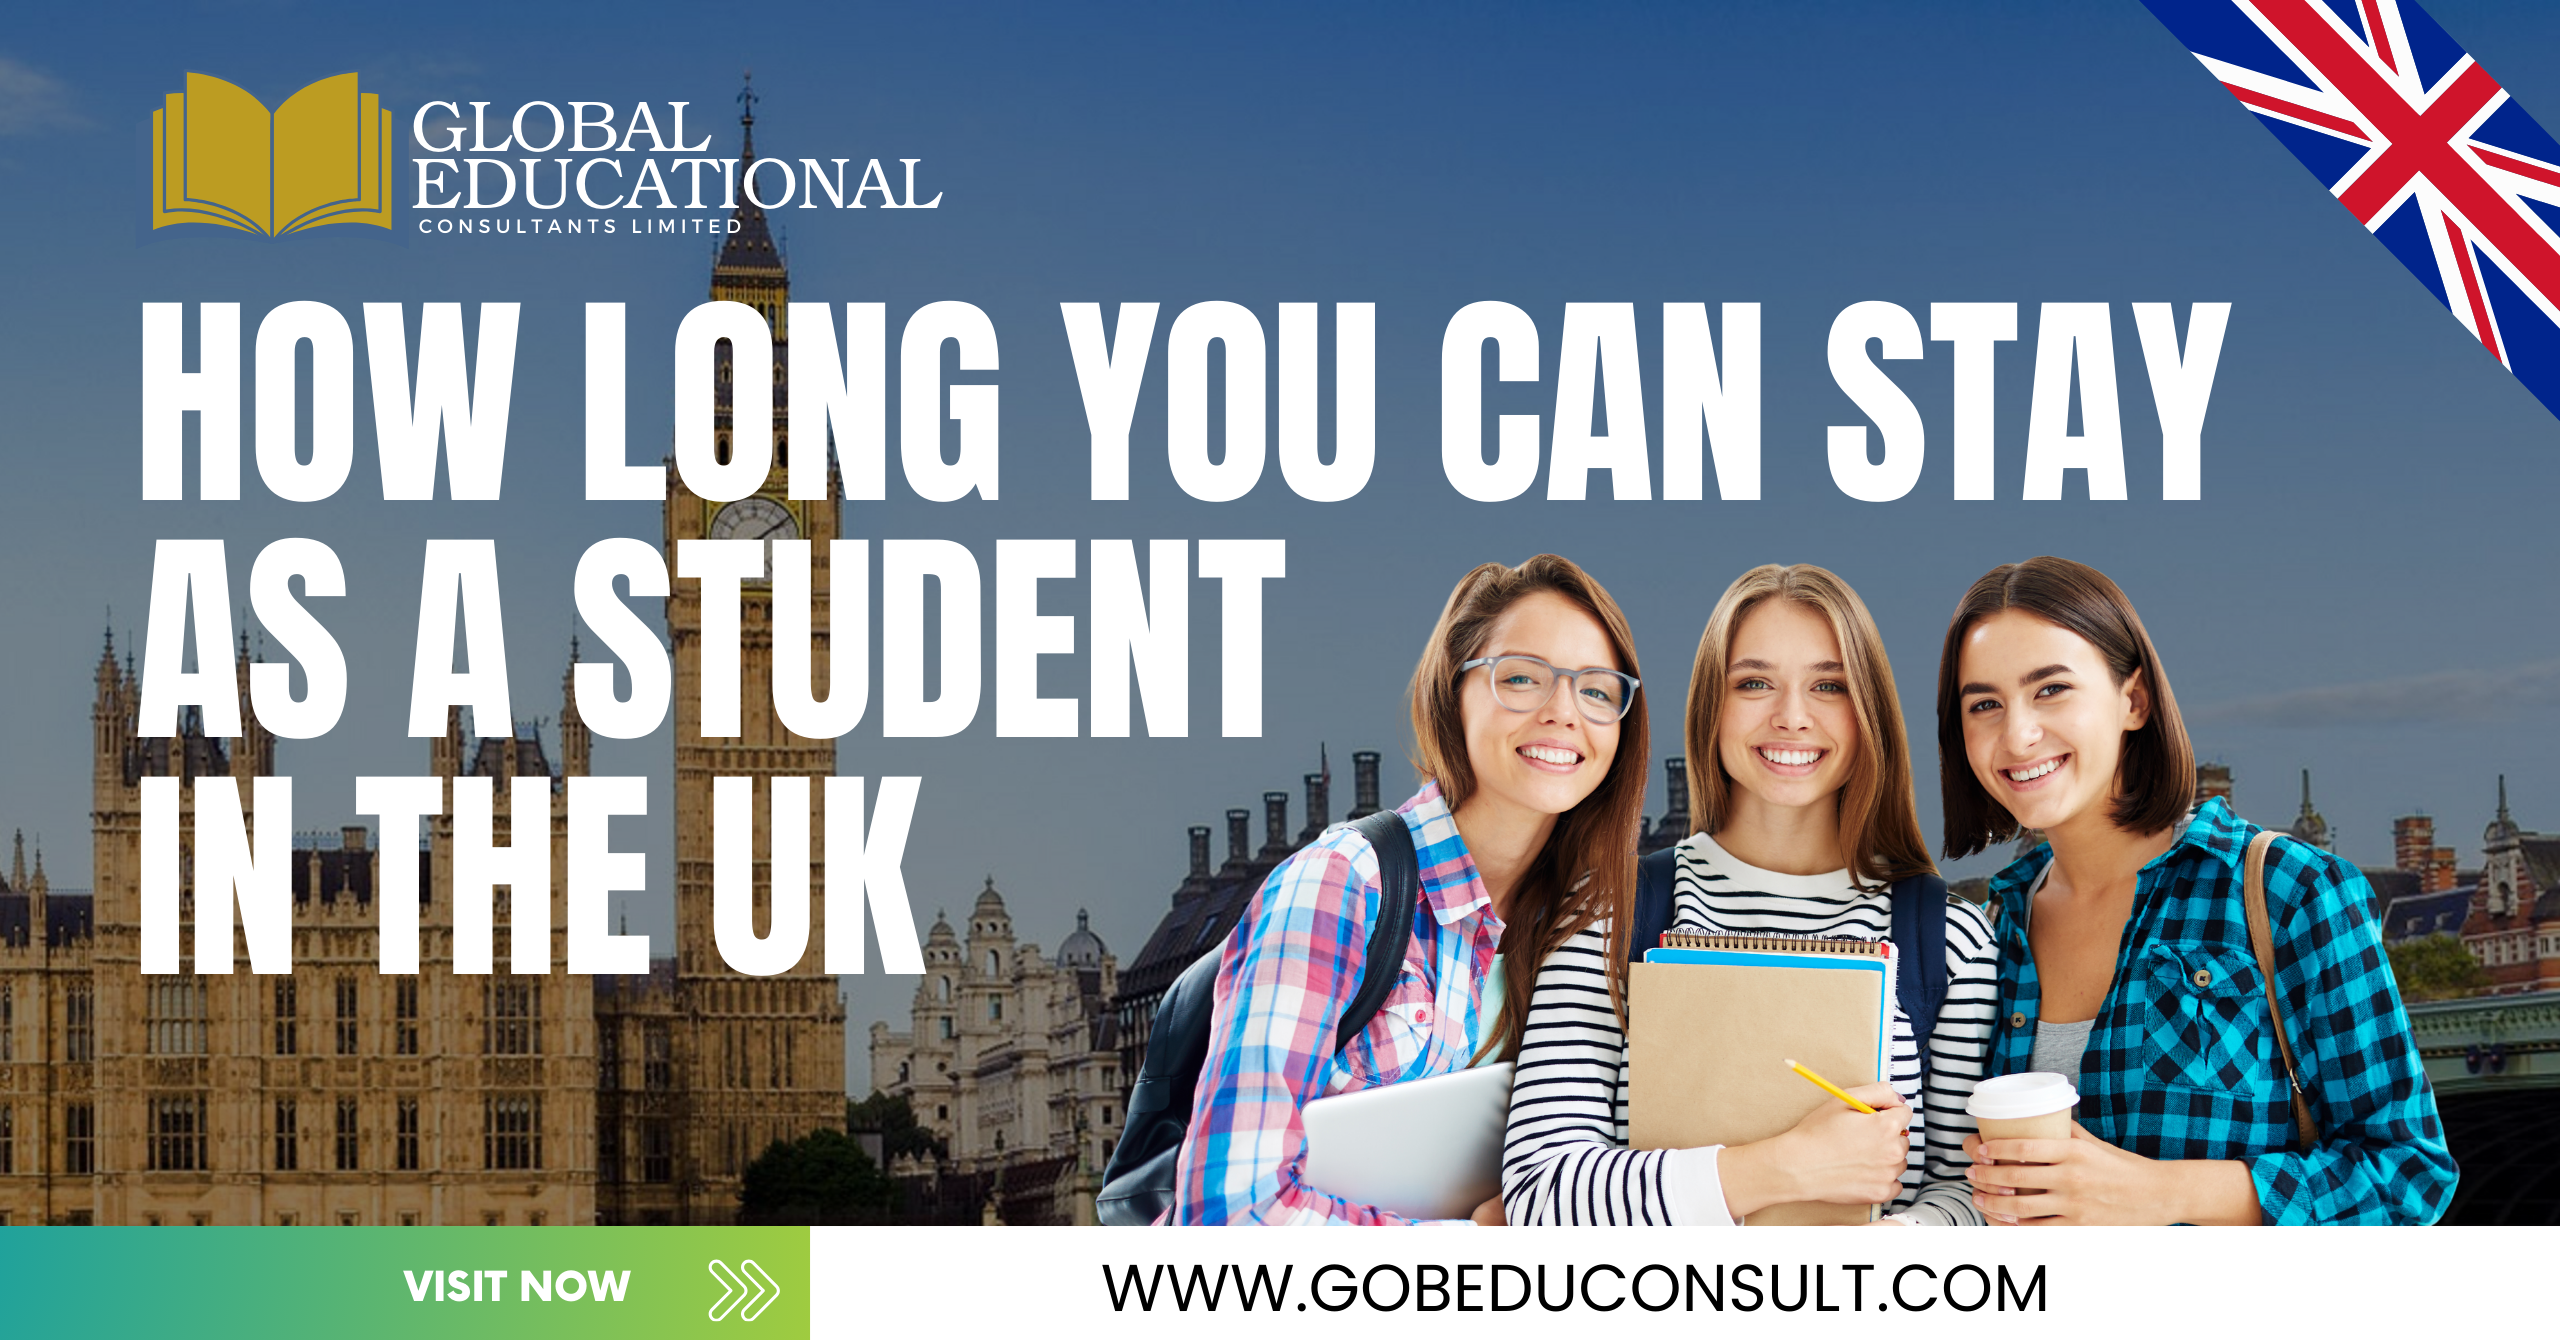 How Long You Can Stay As a Student in the UK